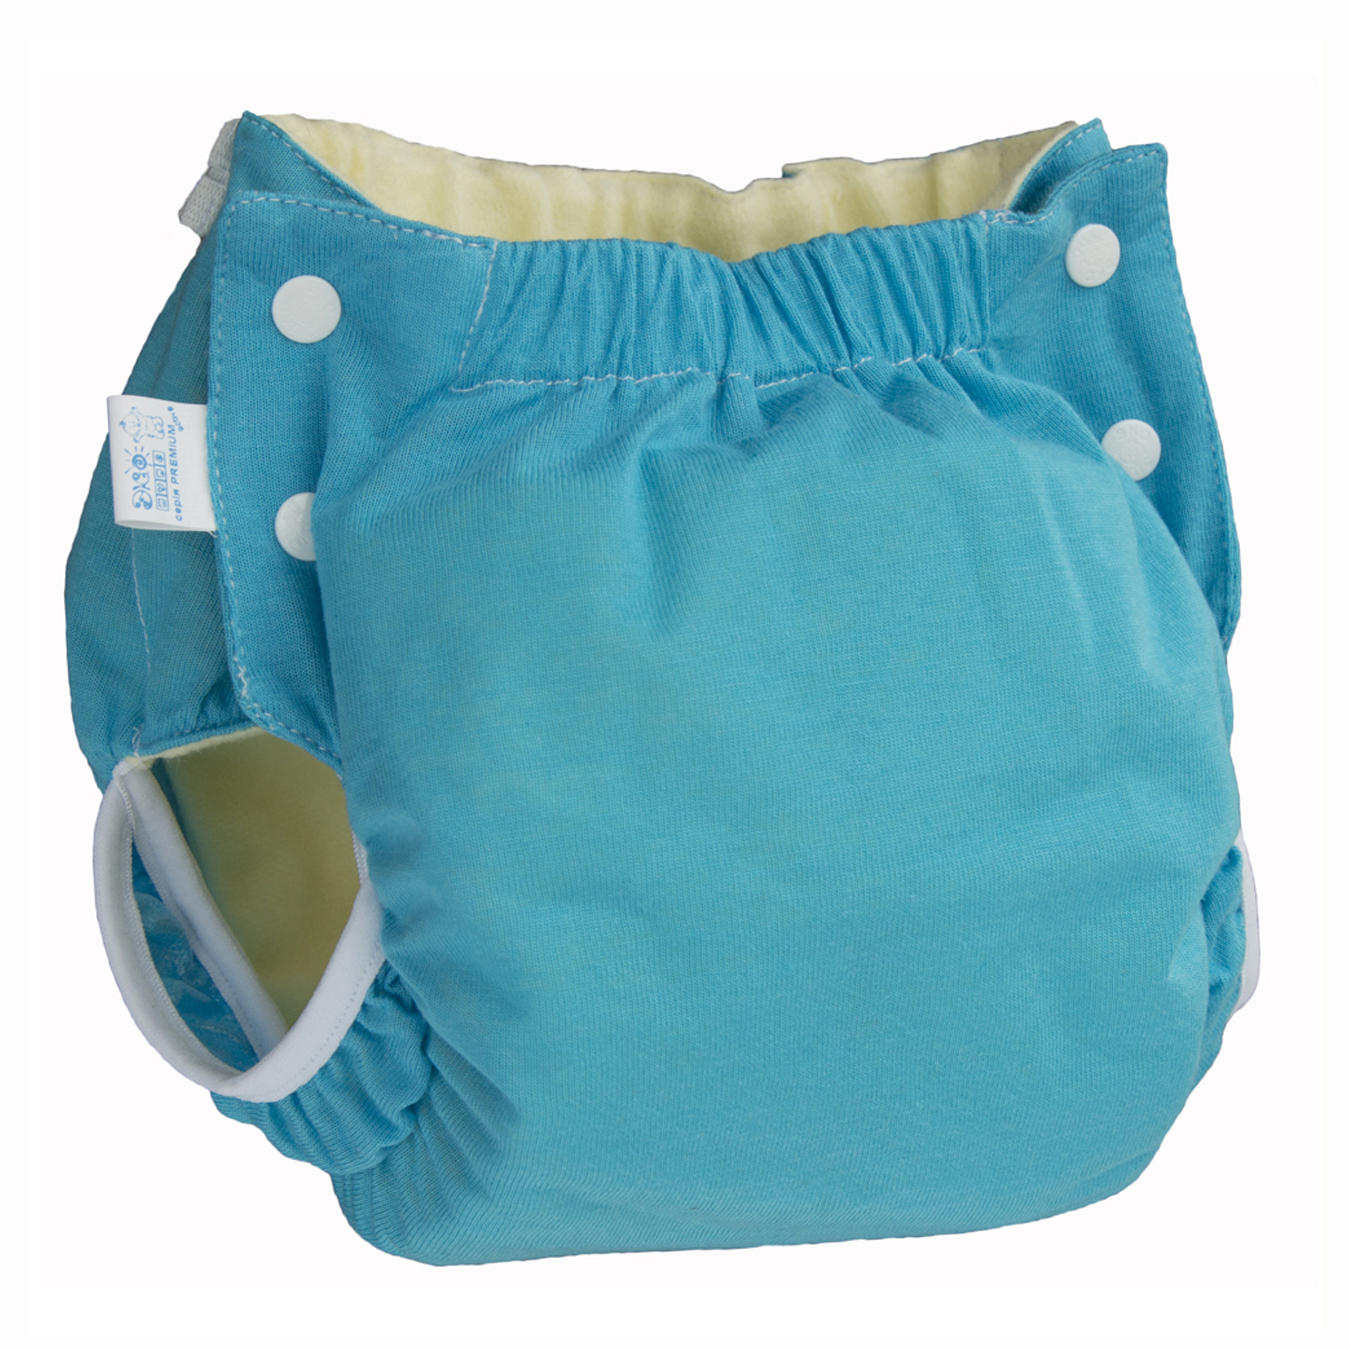 Diaper Abso Maxi turquoise Eco Pups Active Premium knitted 7-13 kg